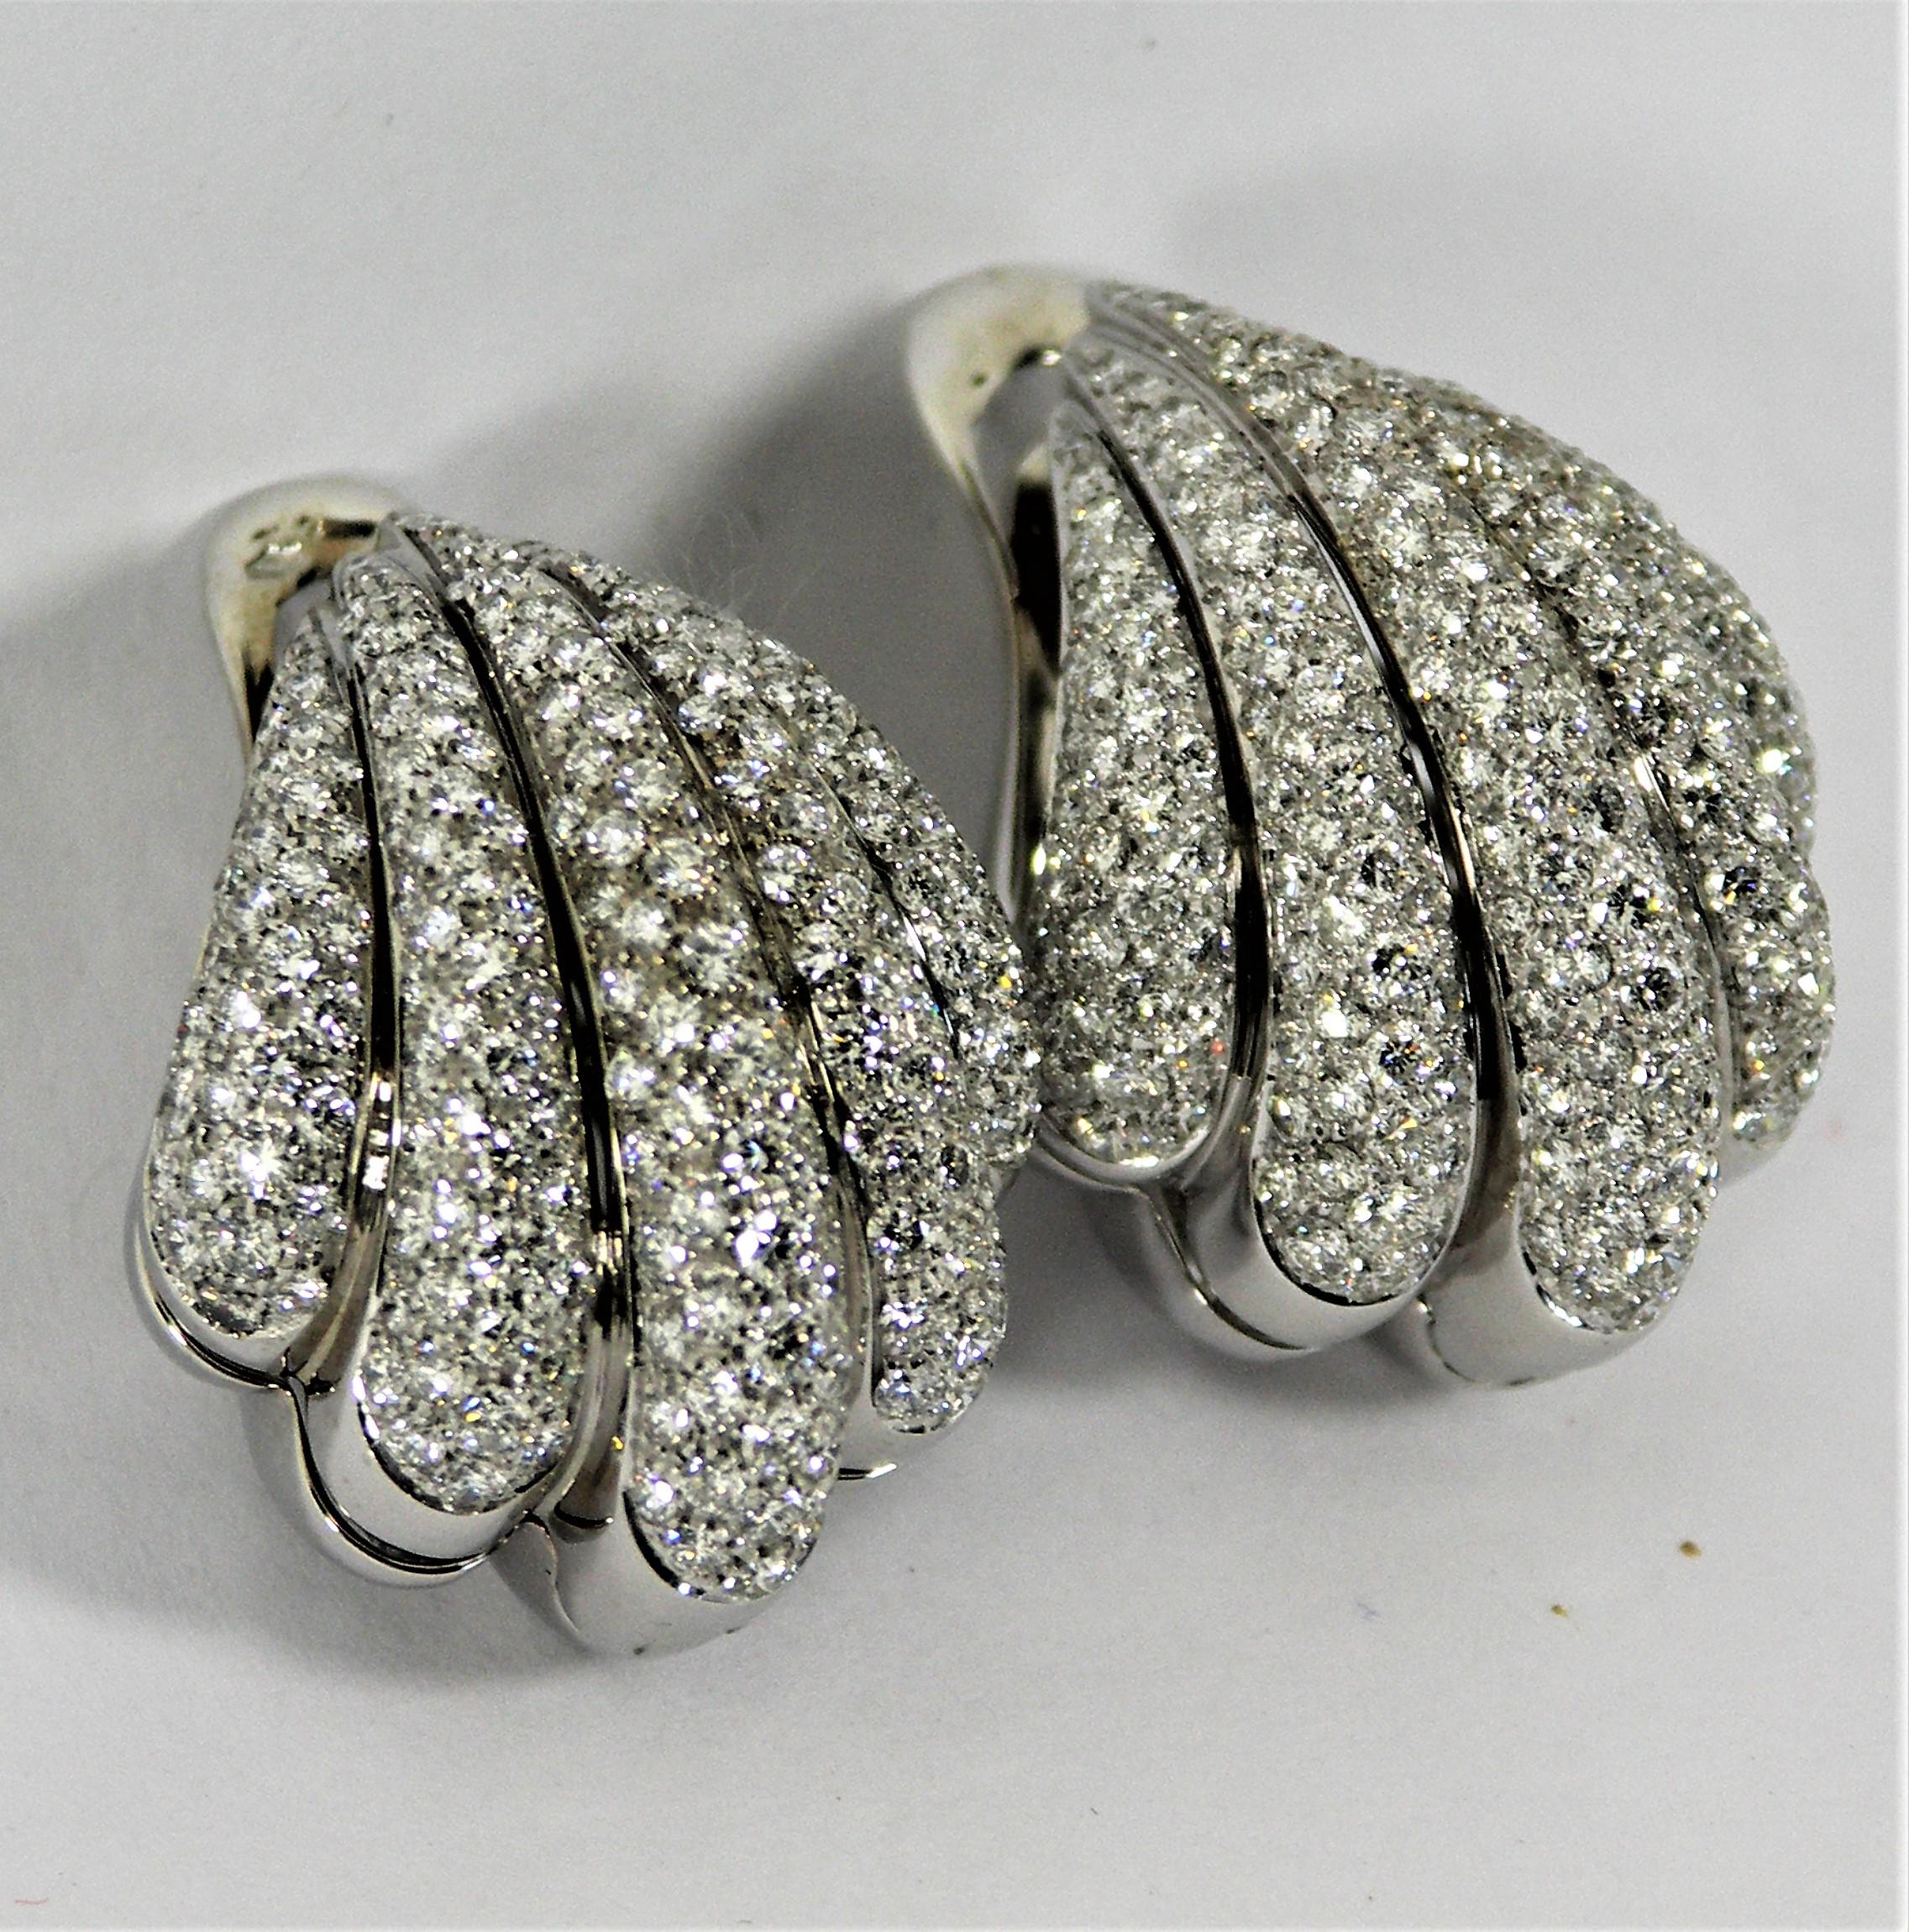 Made in Italy, these stylish 18K White Gold earrings are encrusted with approximately
8.00CT of F/G Color VS1 clarity diamonds. The clever construction, with the entire
back side of the earring dropping down and opening up, makes it very easy to